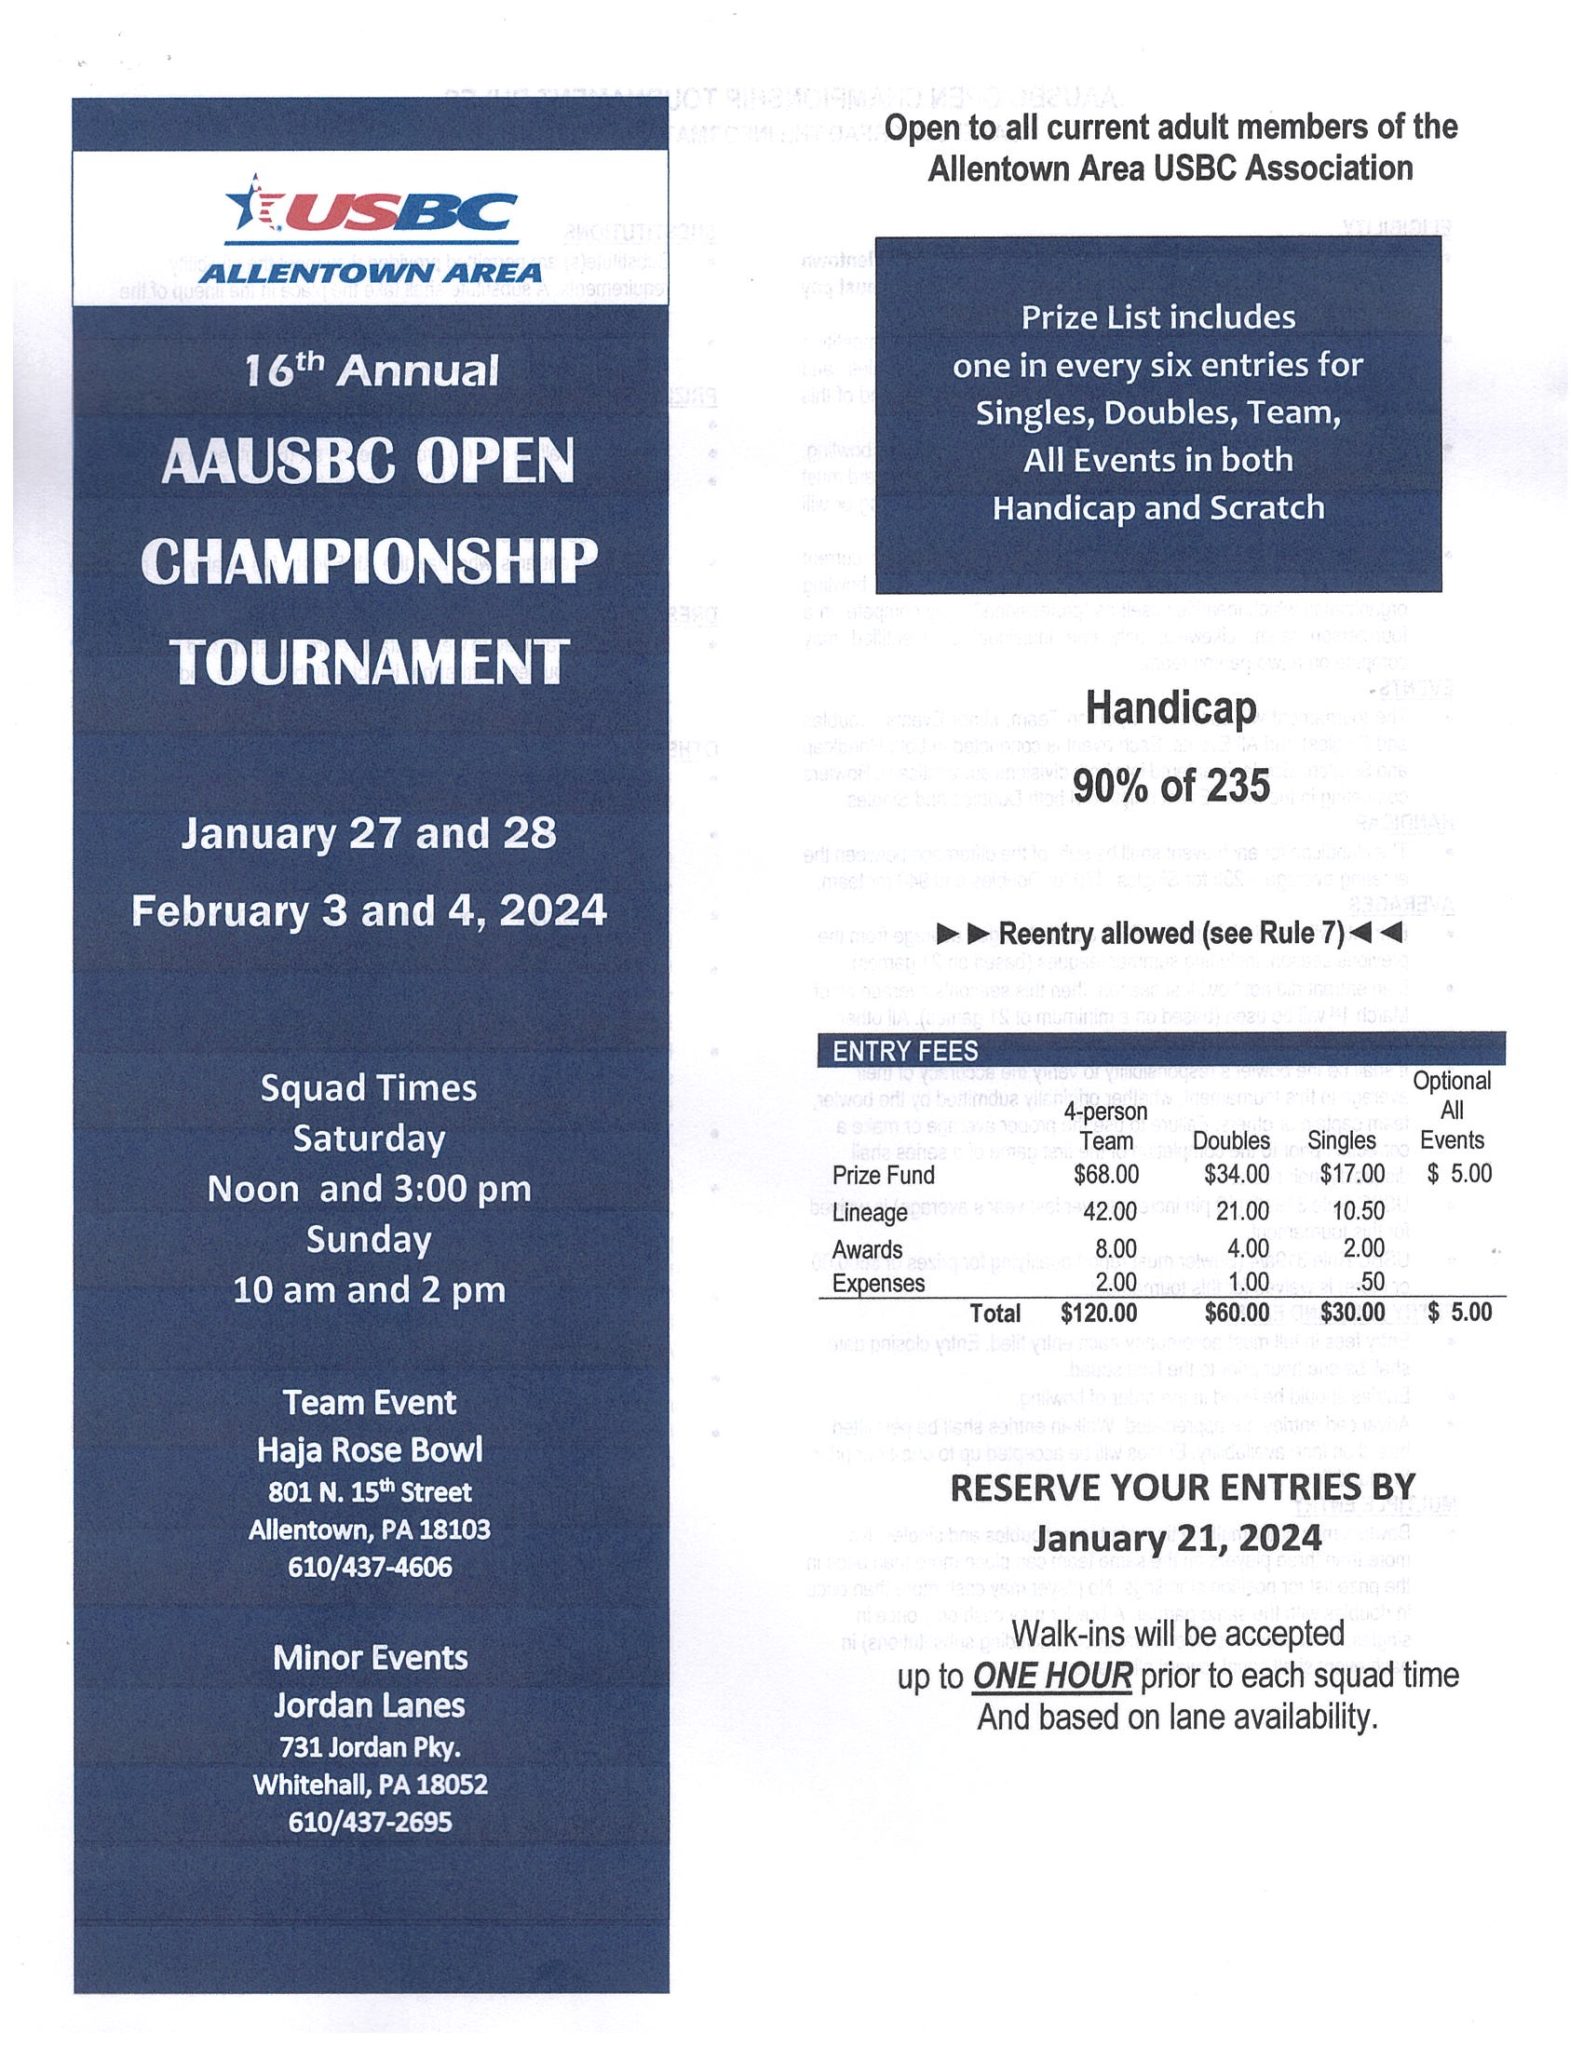 16th Annual AAUSBC Open Championship Tournament 11